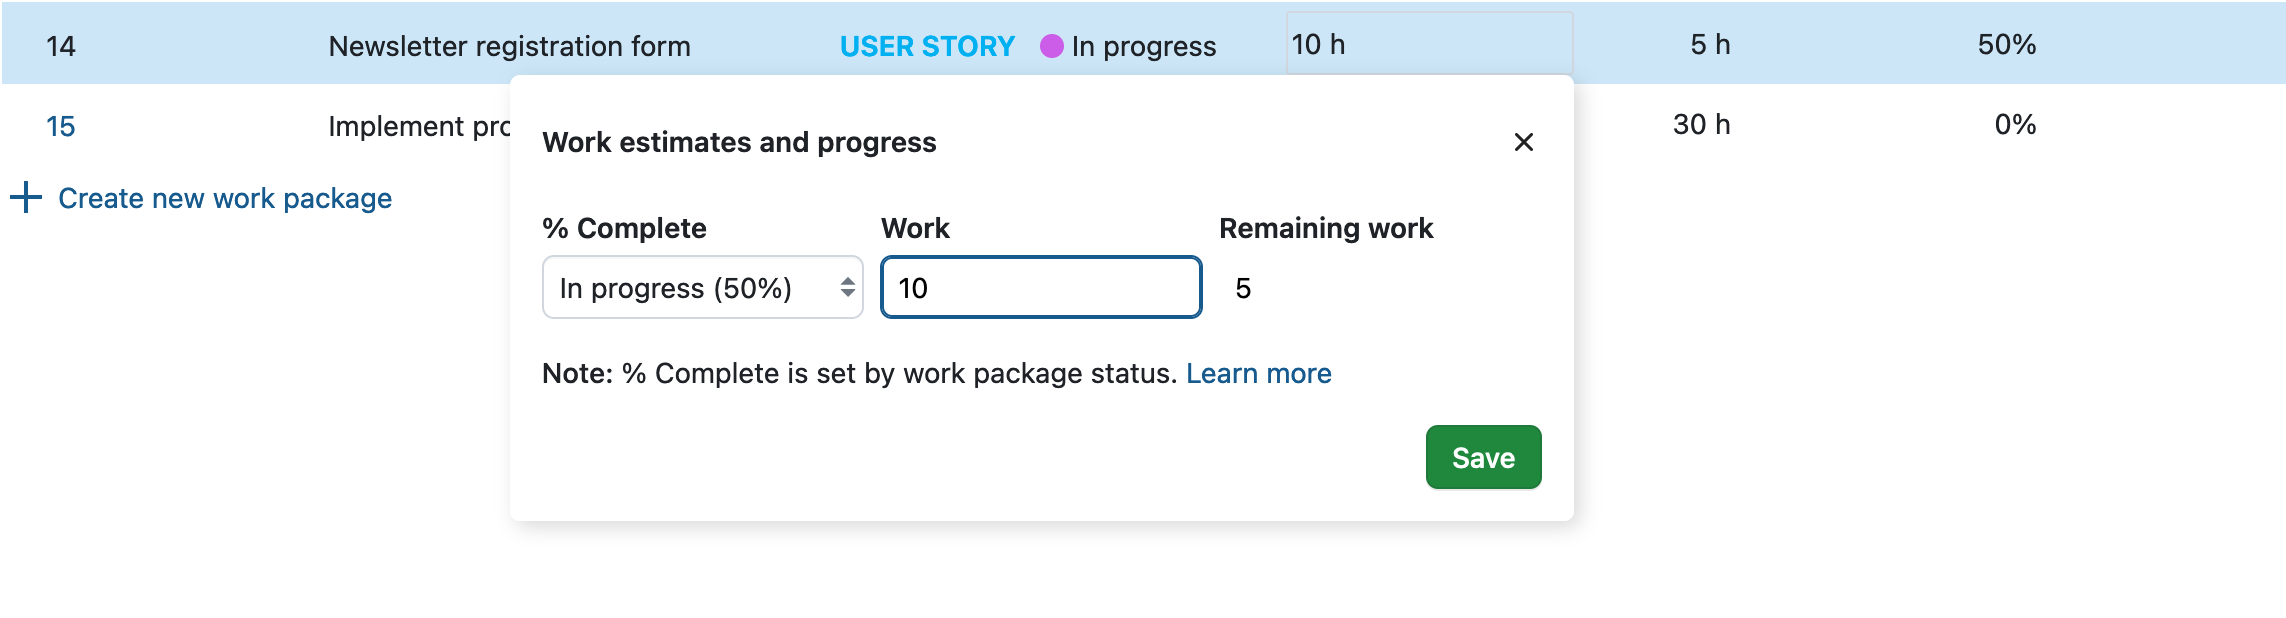 Work estimates and progress pop-over with status-based progress reporting